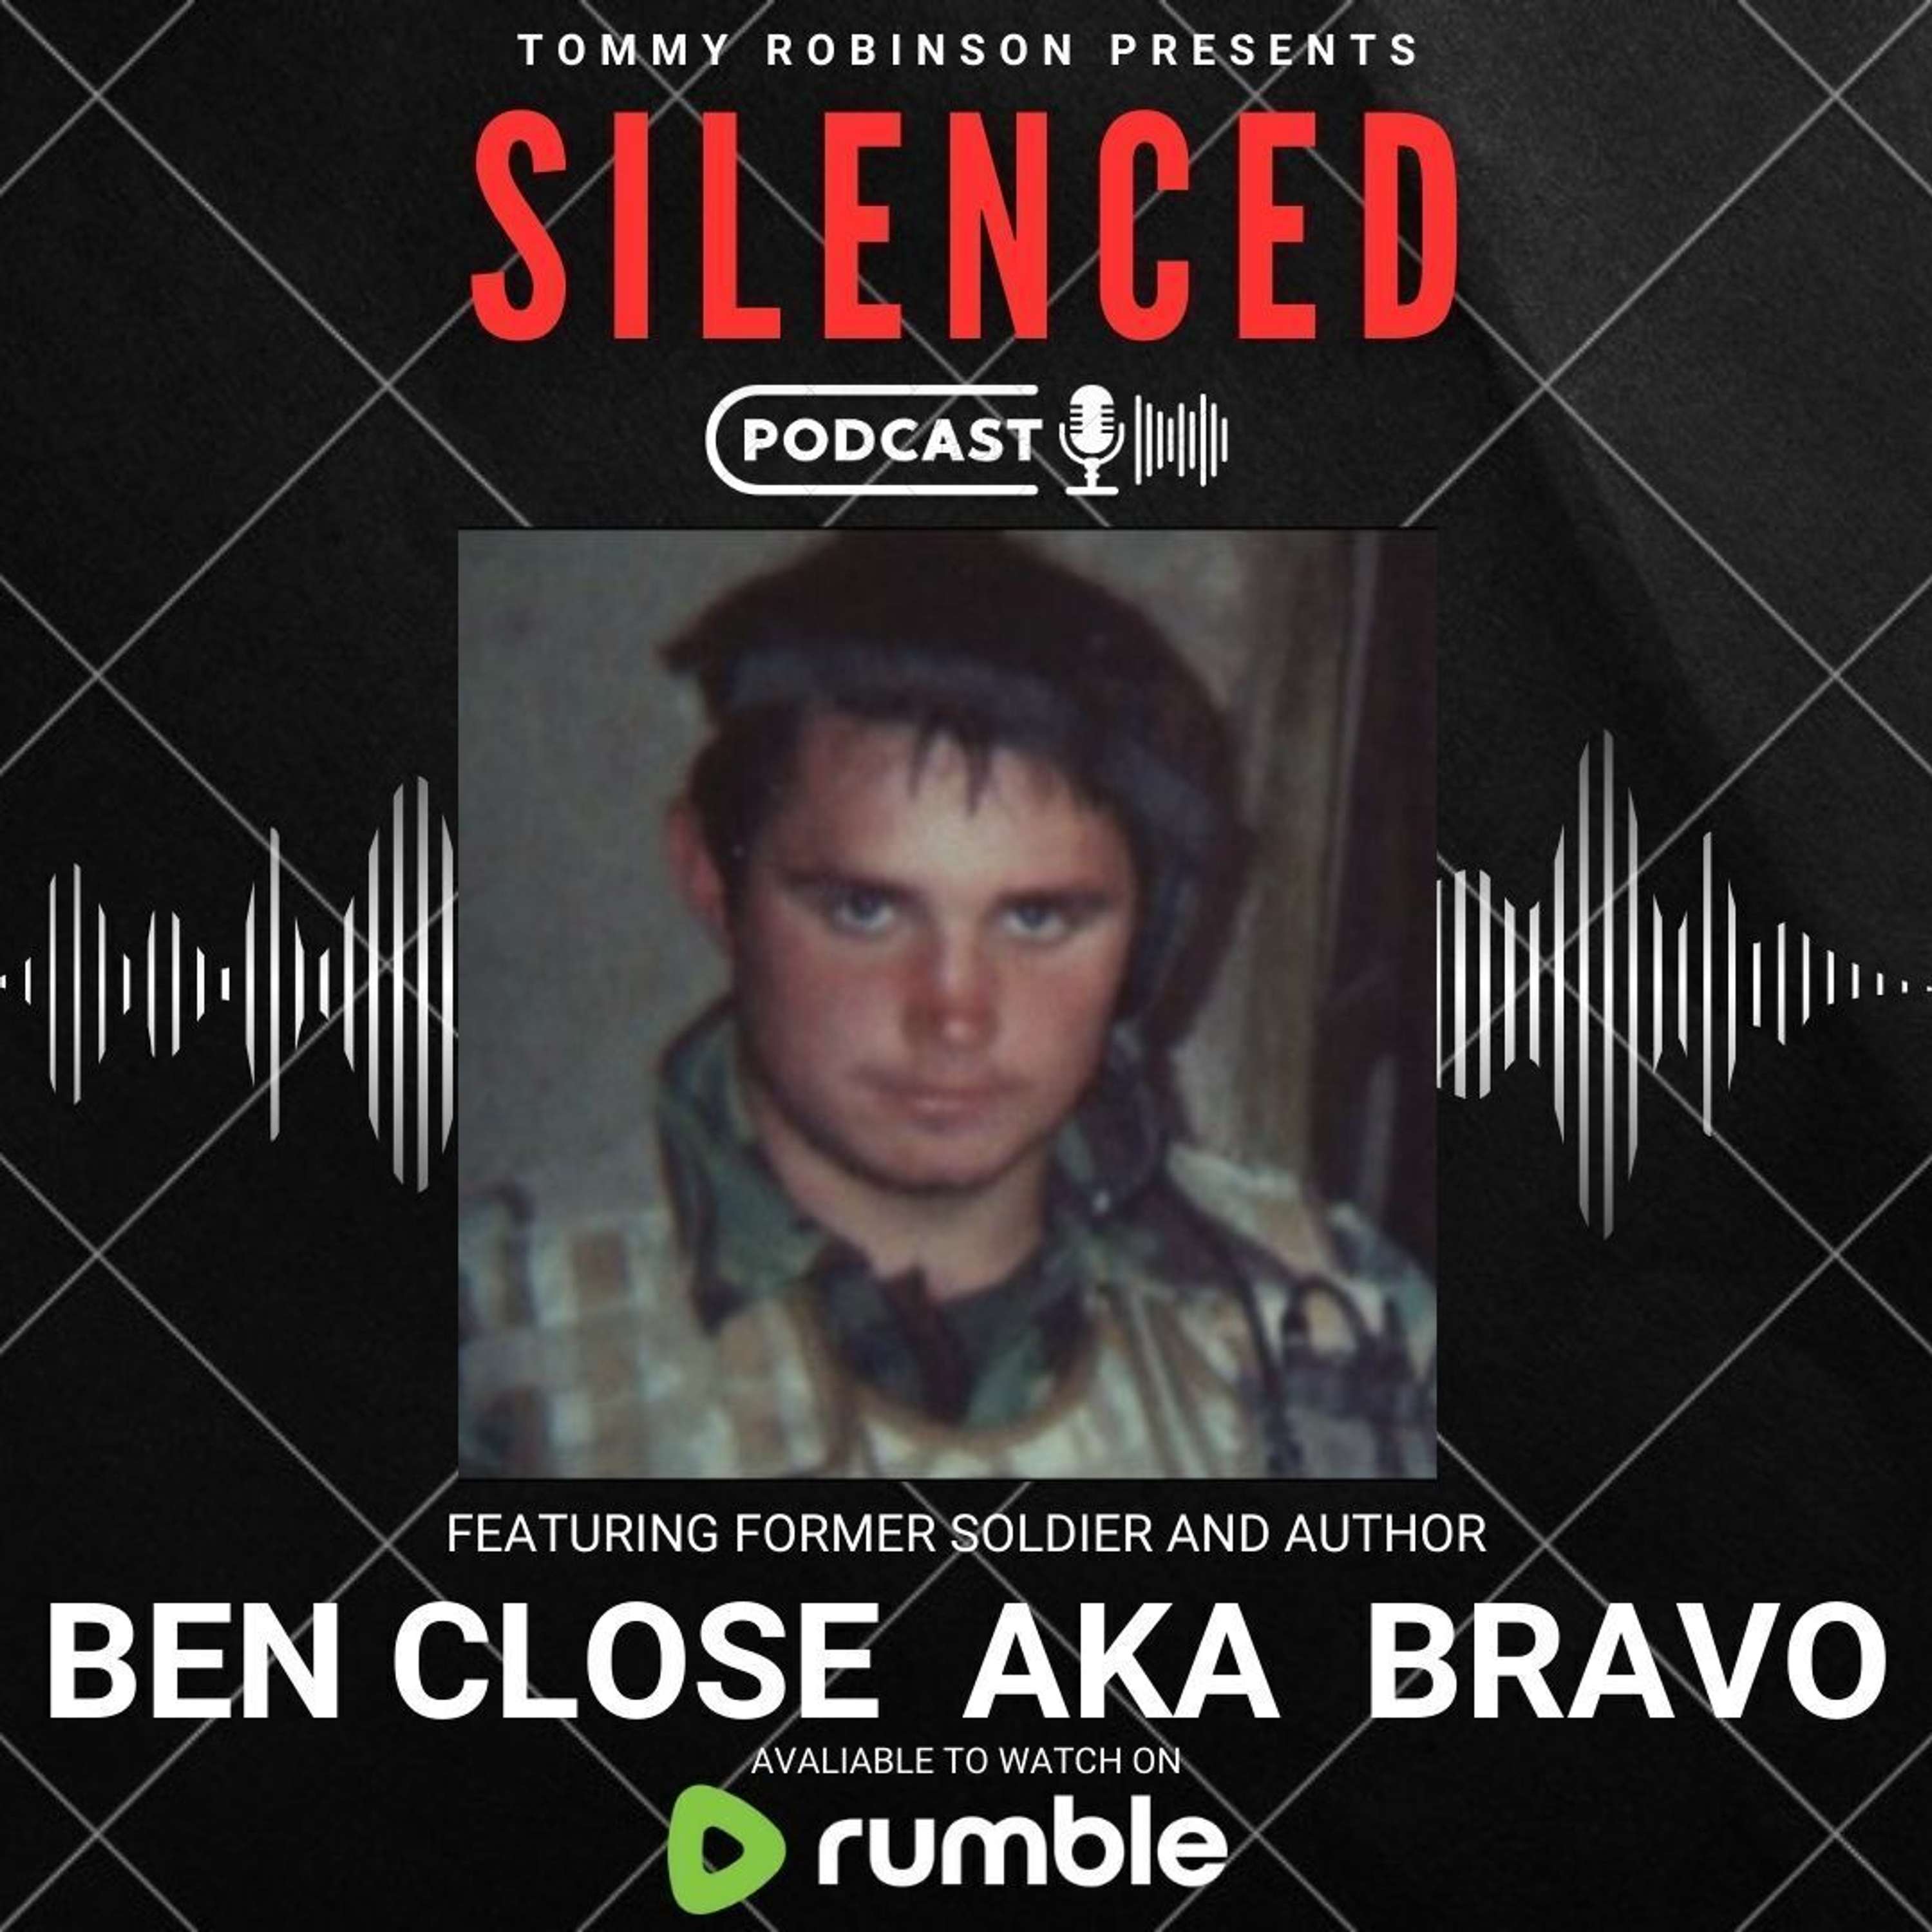 Episode 11 SILENCED with Tommy Robinson - Ben Close